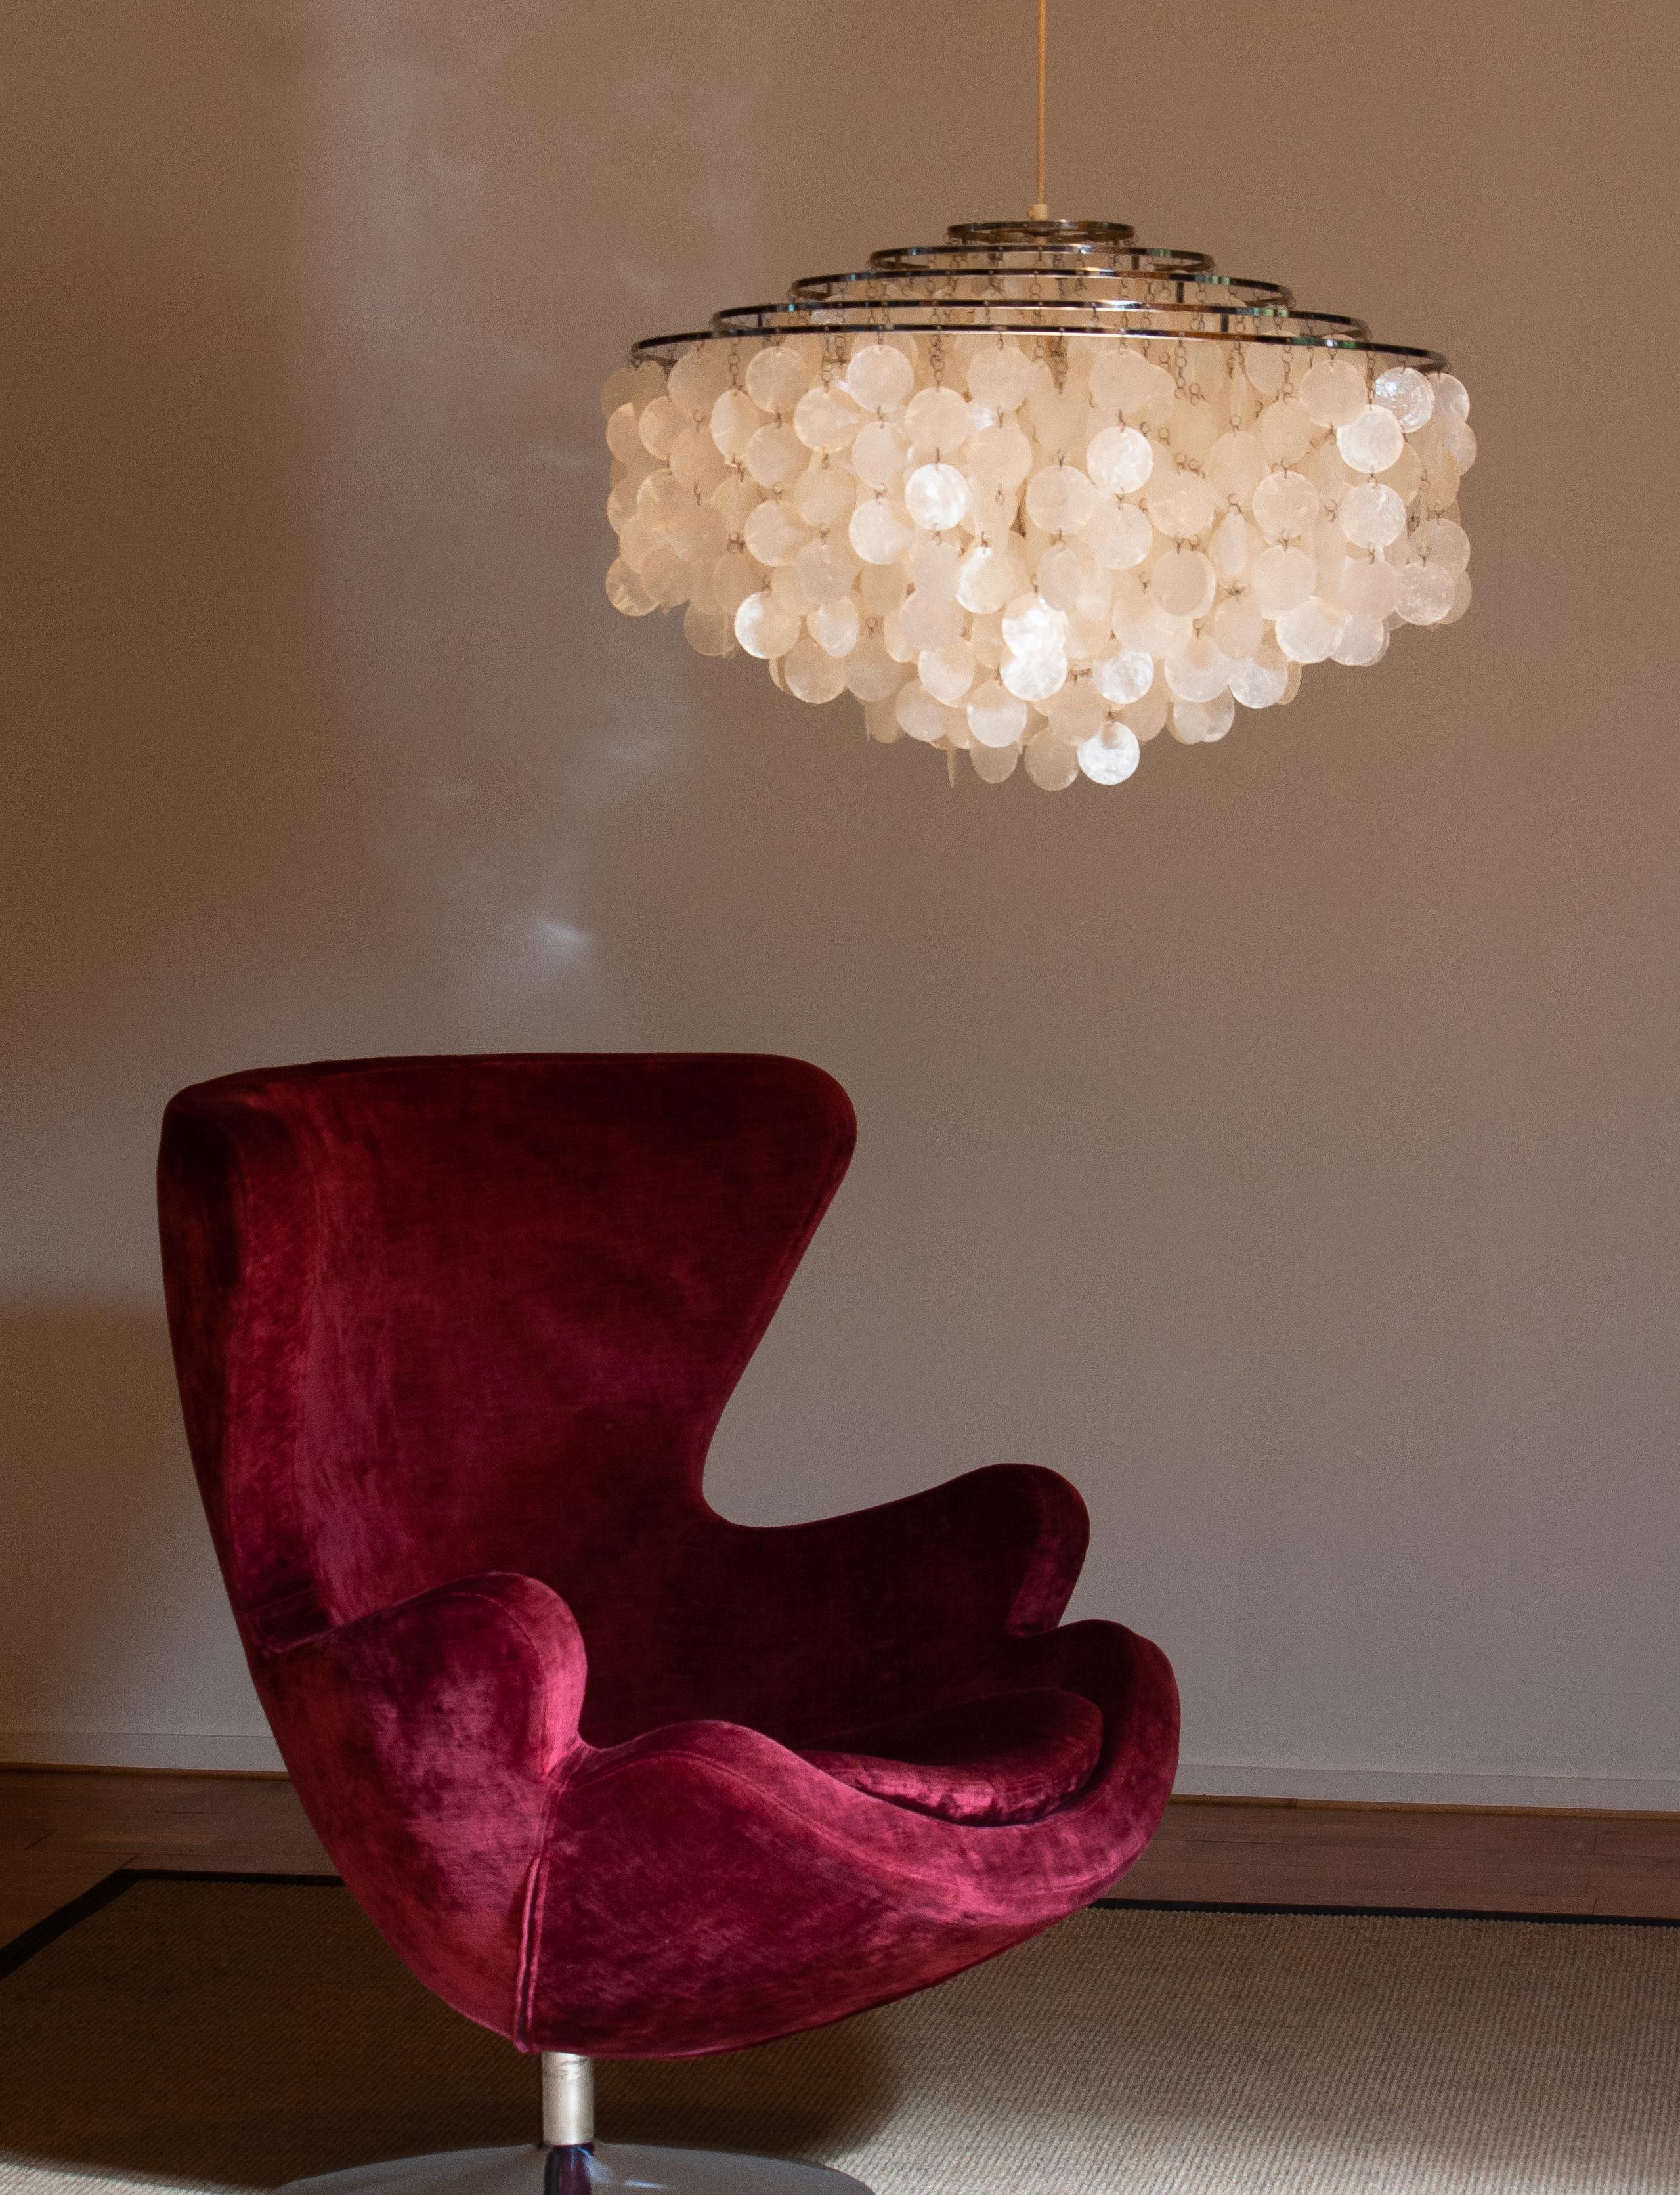 1960s, Extra Large Capiz Shell Chandelier by Verner Panton for Luber Ag, Swiss 2